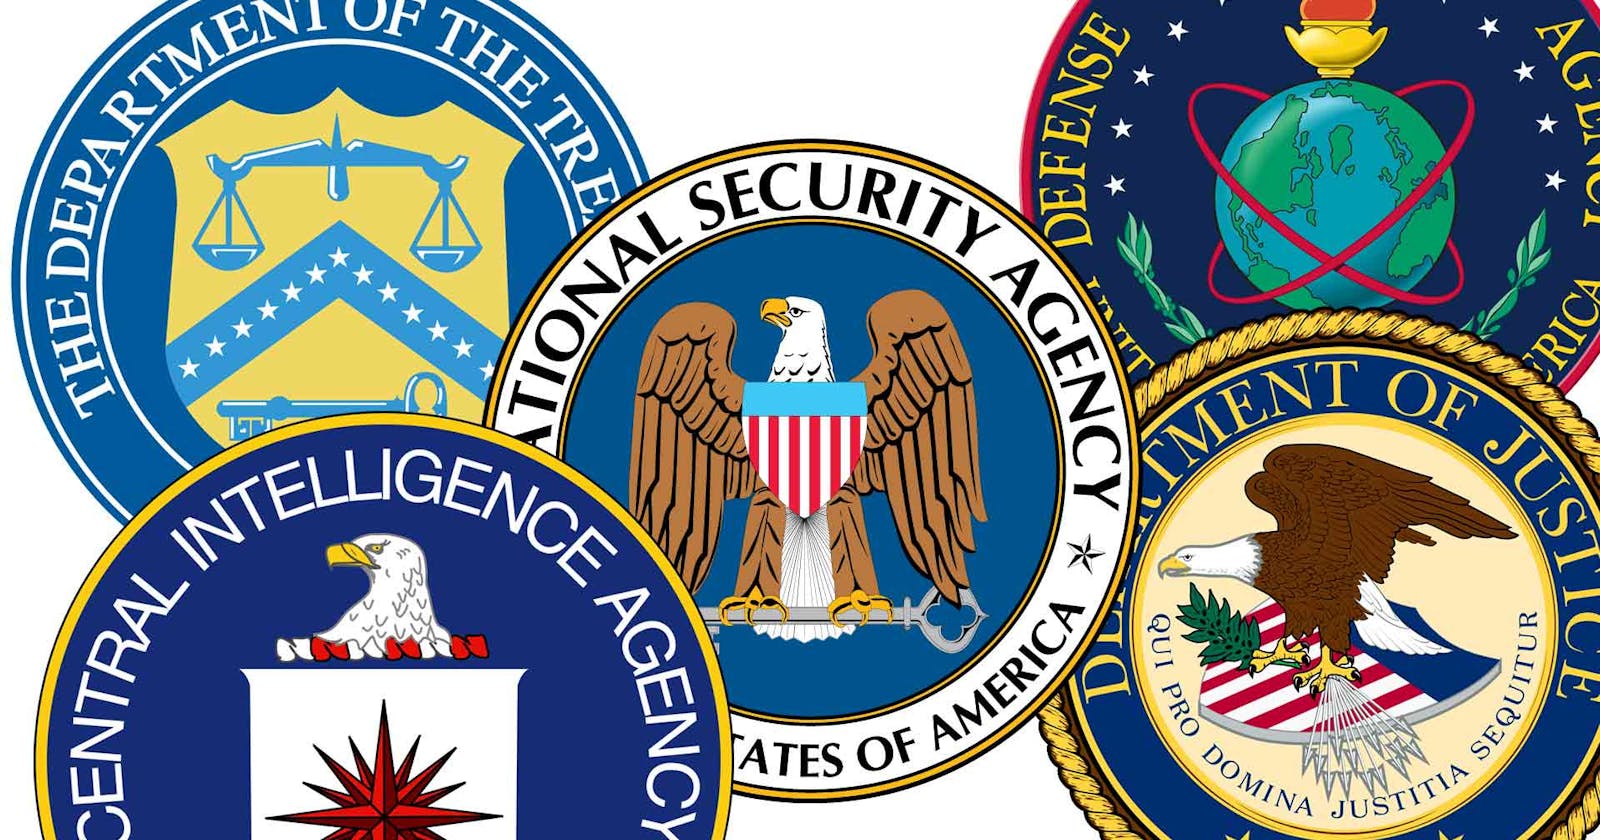 How to evade NSA and CIA surveillance? Basic anonymity techniques for Black Hats.